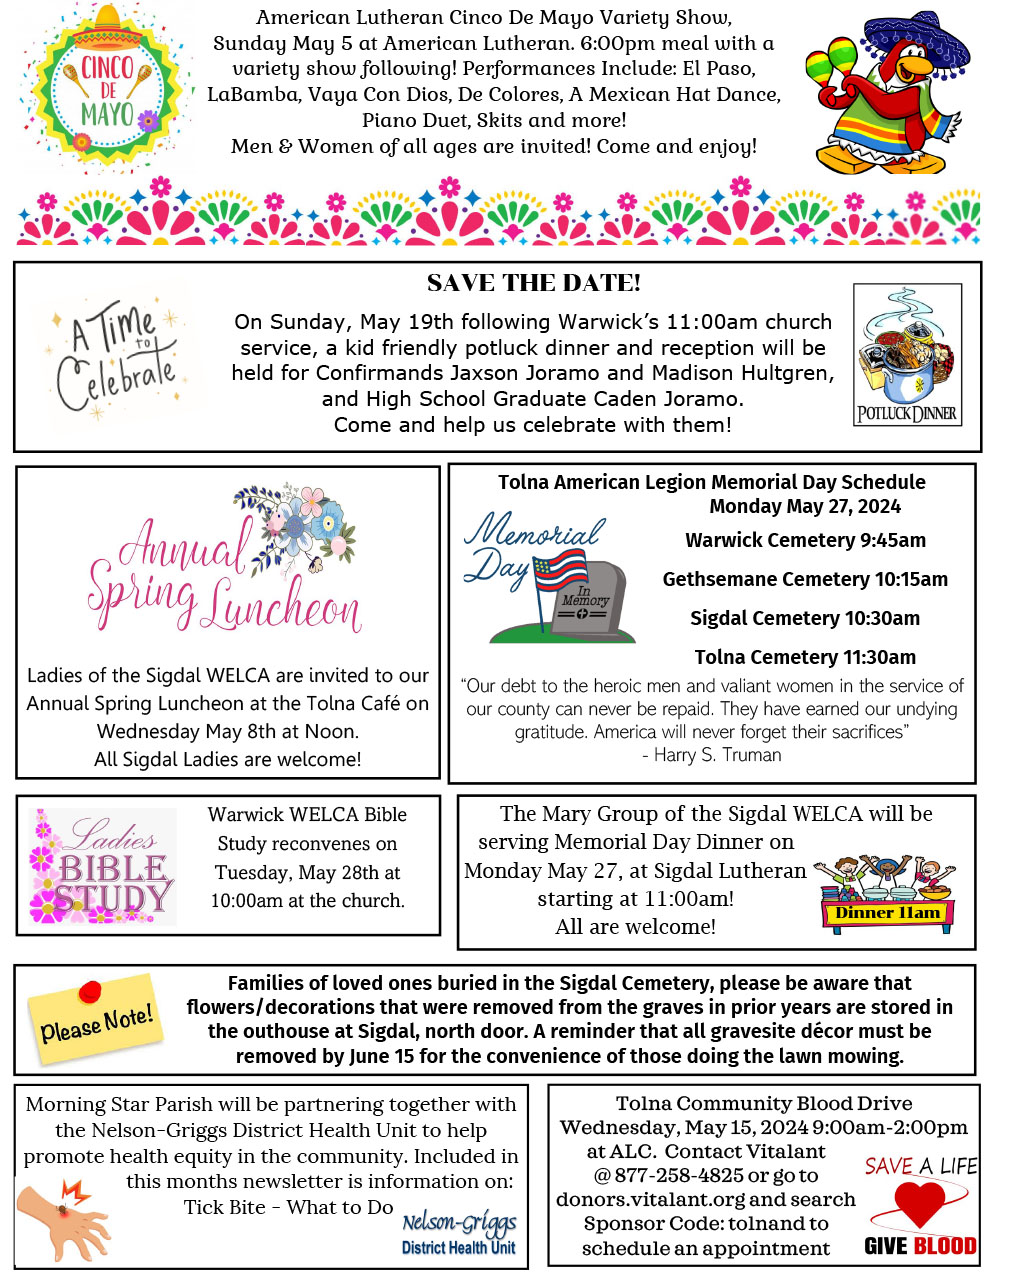 Newsletter page 2 information about events and church worship times